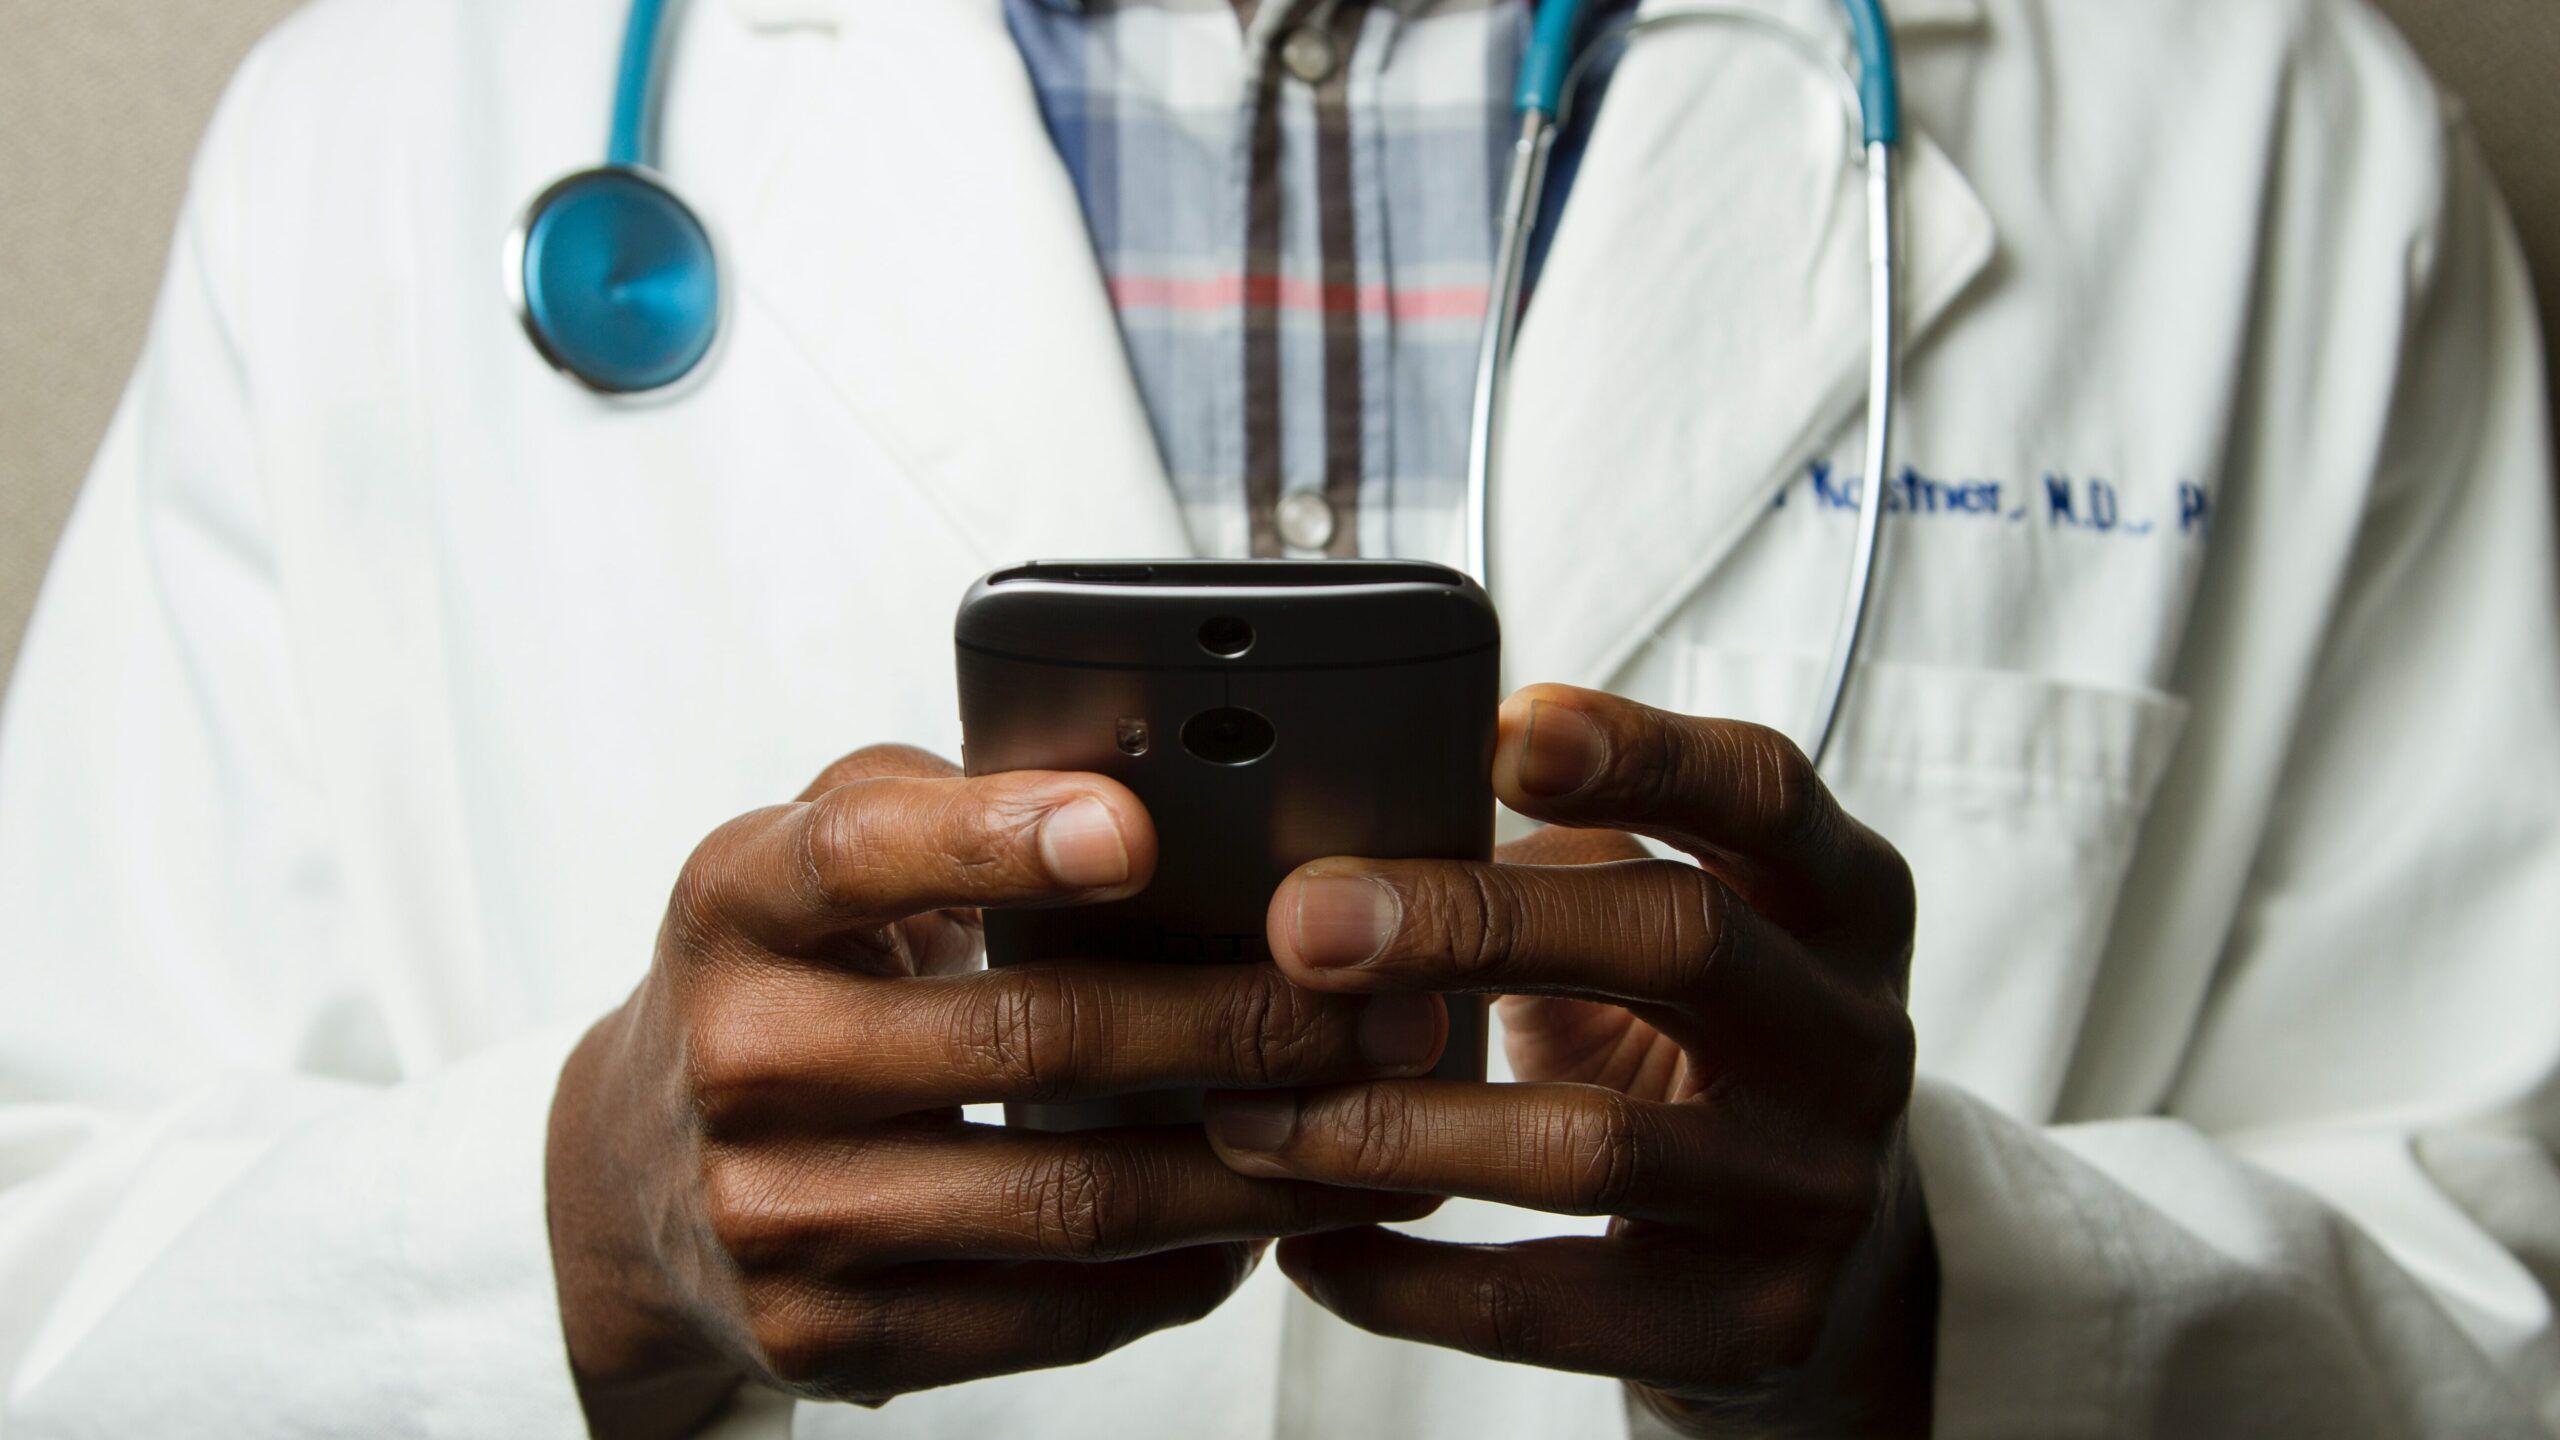 Doctor holding mobile phone in hands viewing patient data